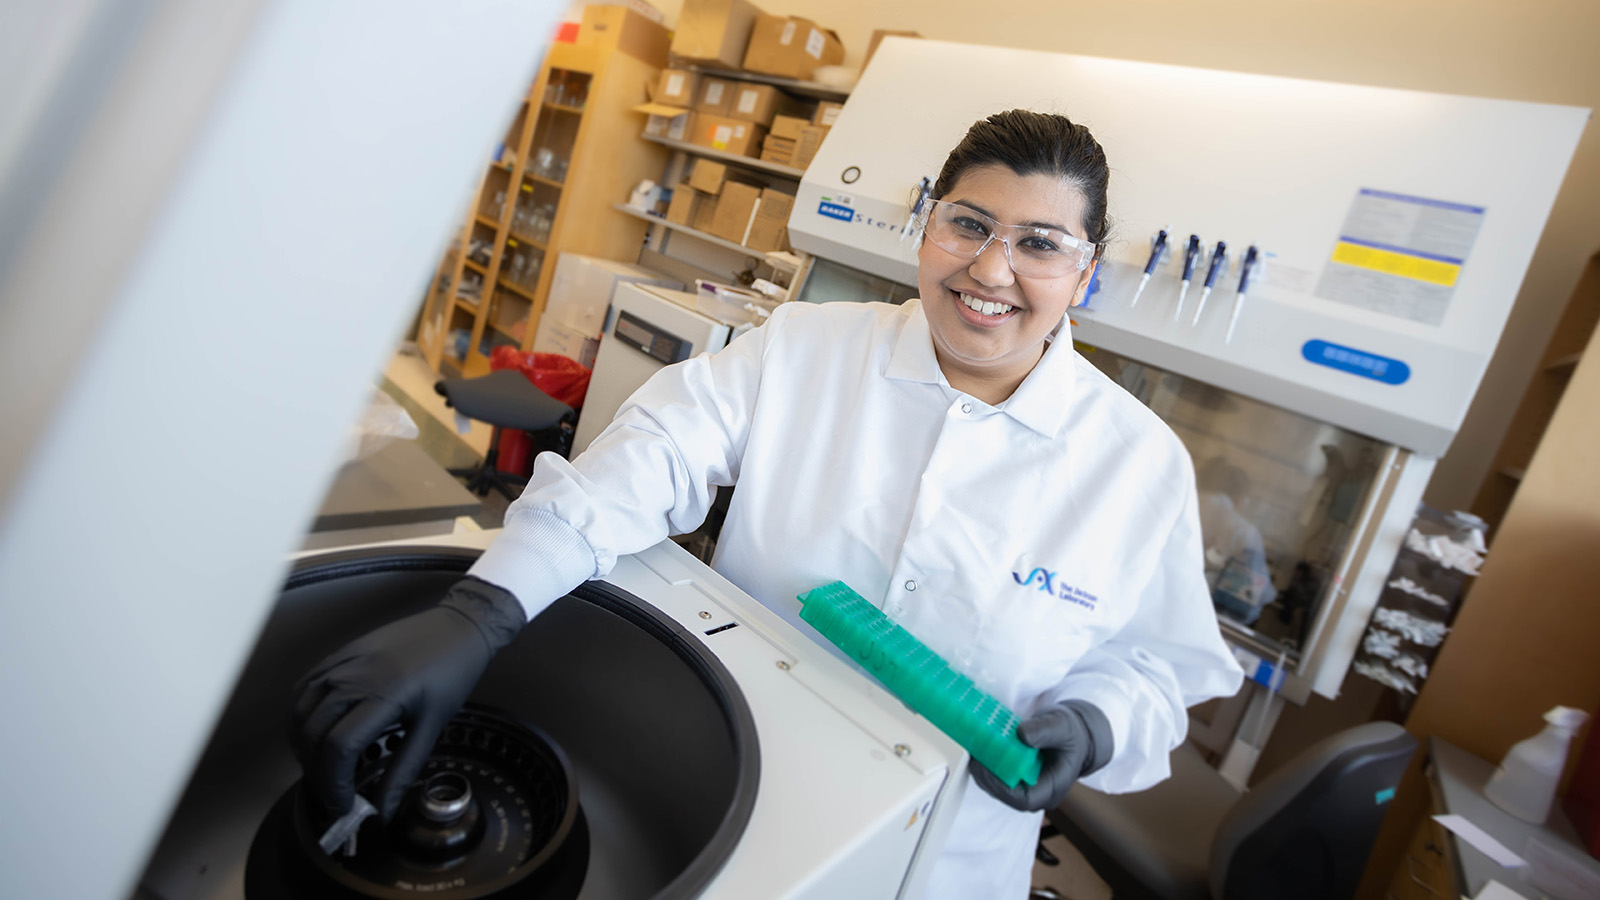 Jayna Mistry working in her lab at the Jackson Laboratory. Photo credit: Tiffany Laufer